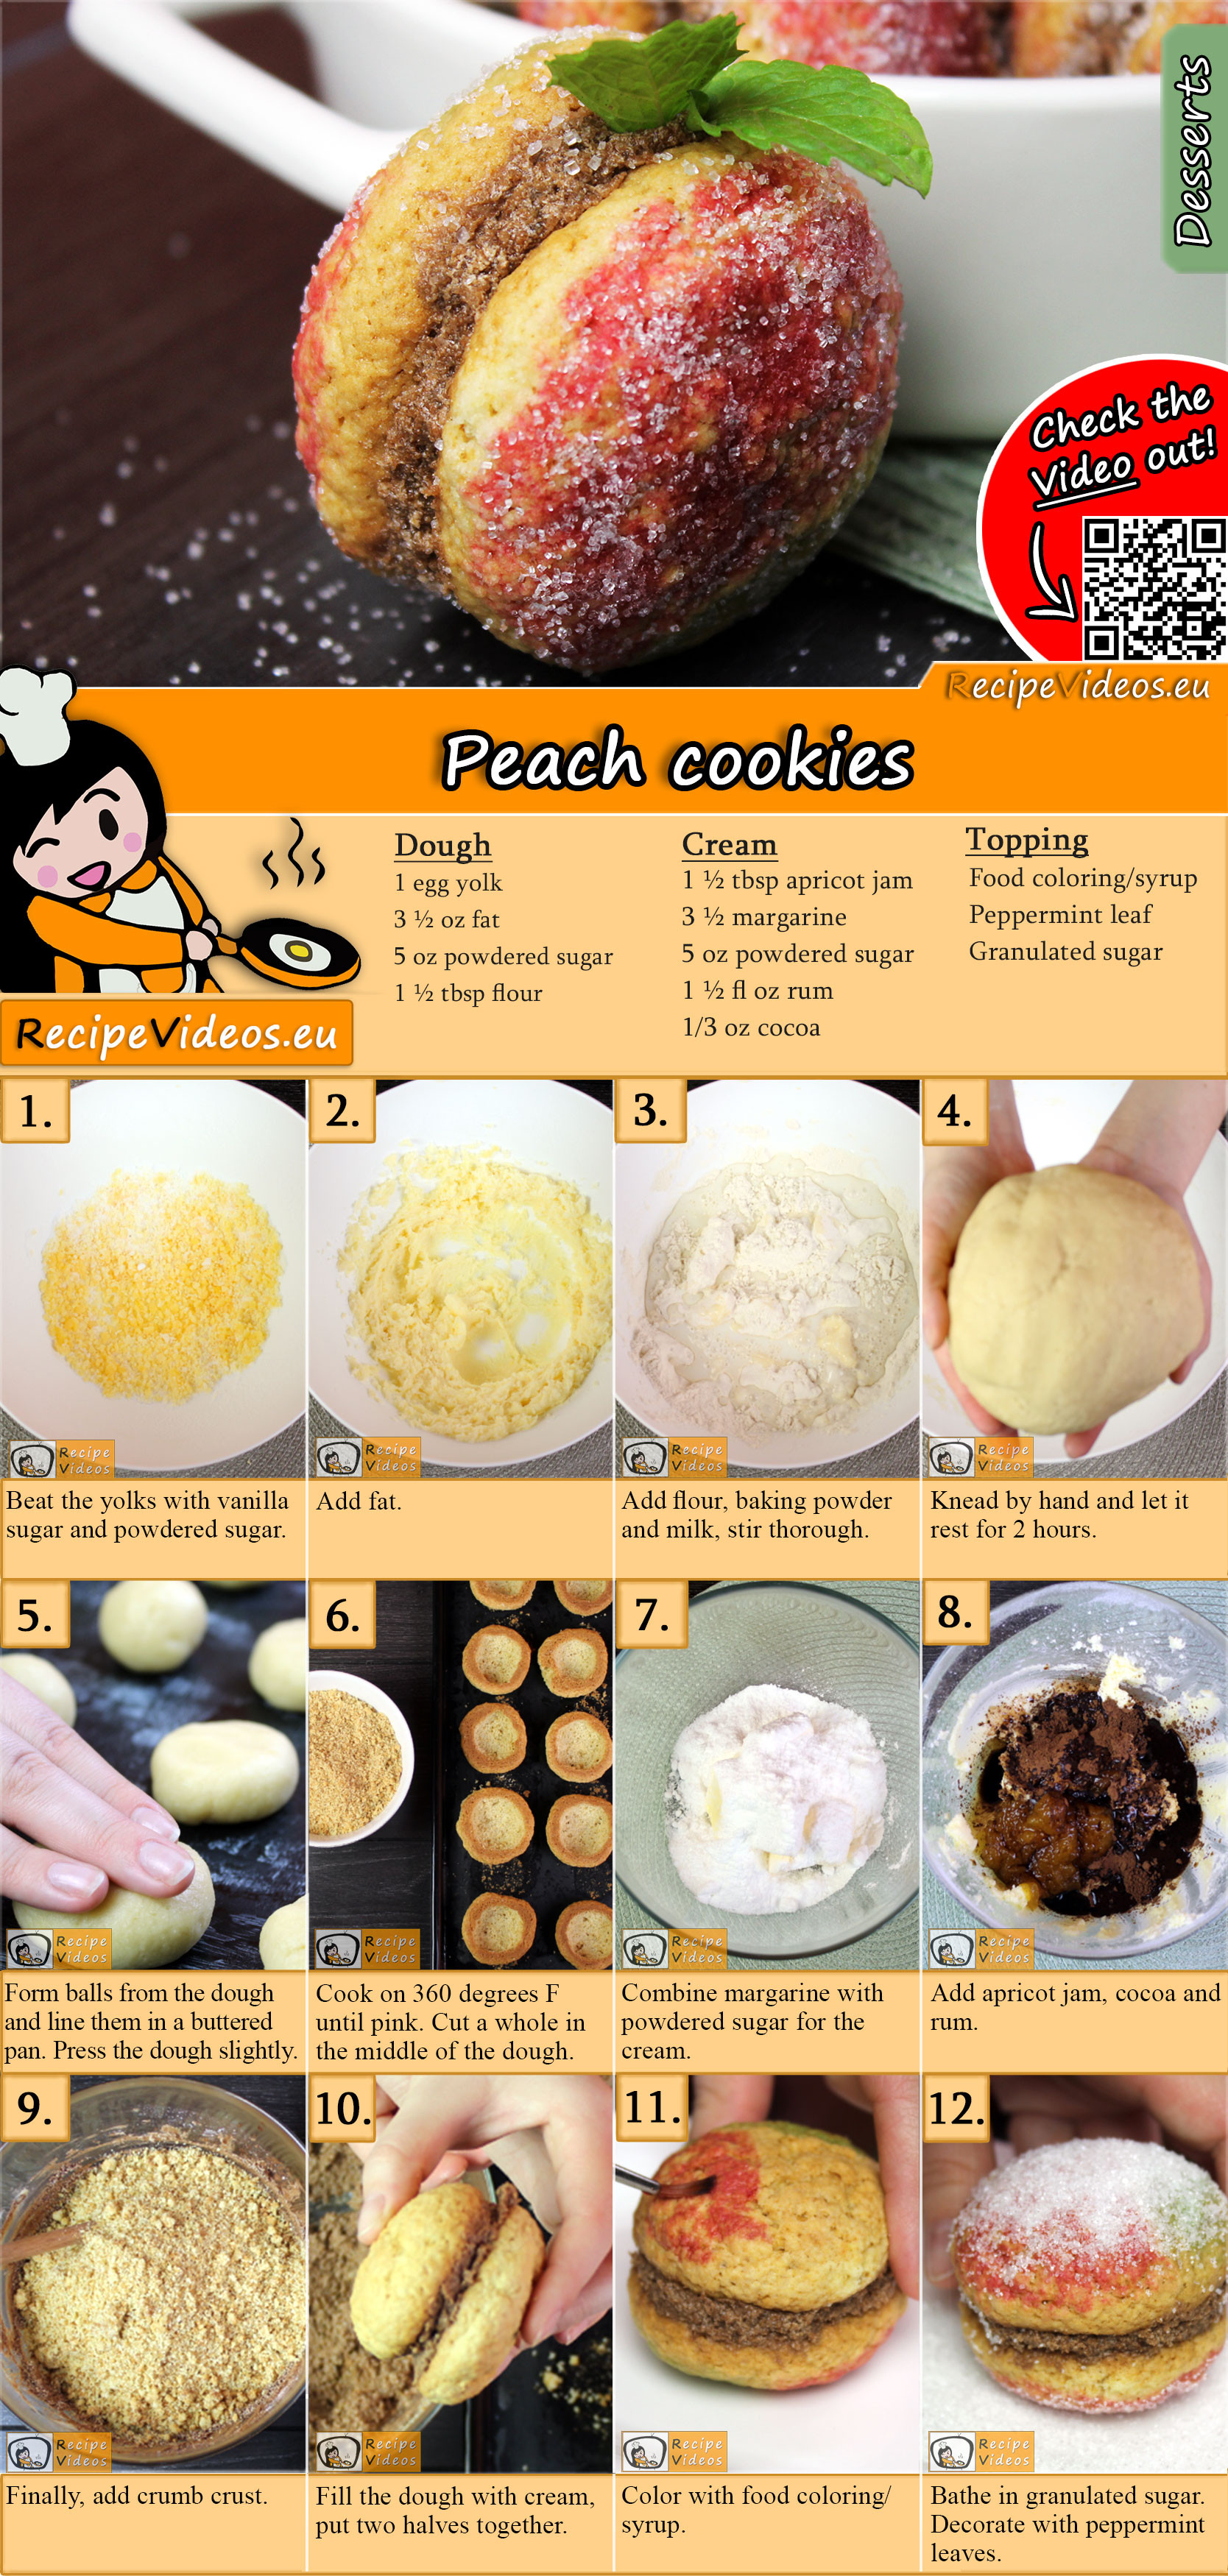 Peach cookies recipe with video